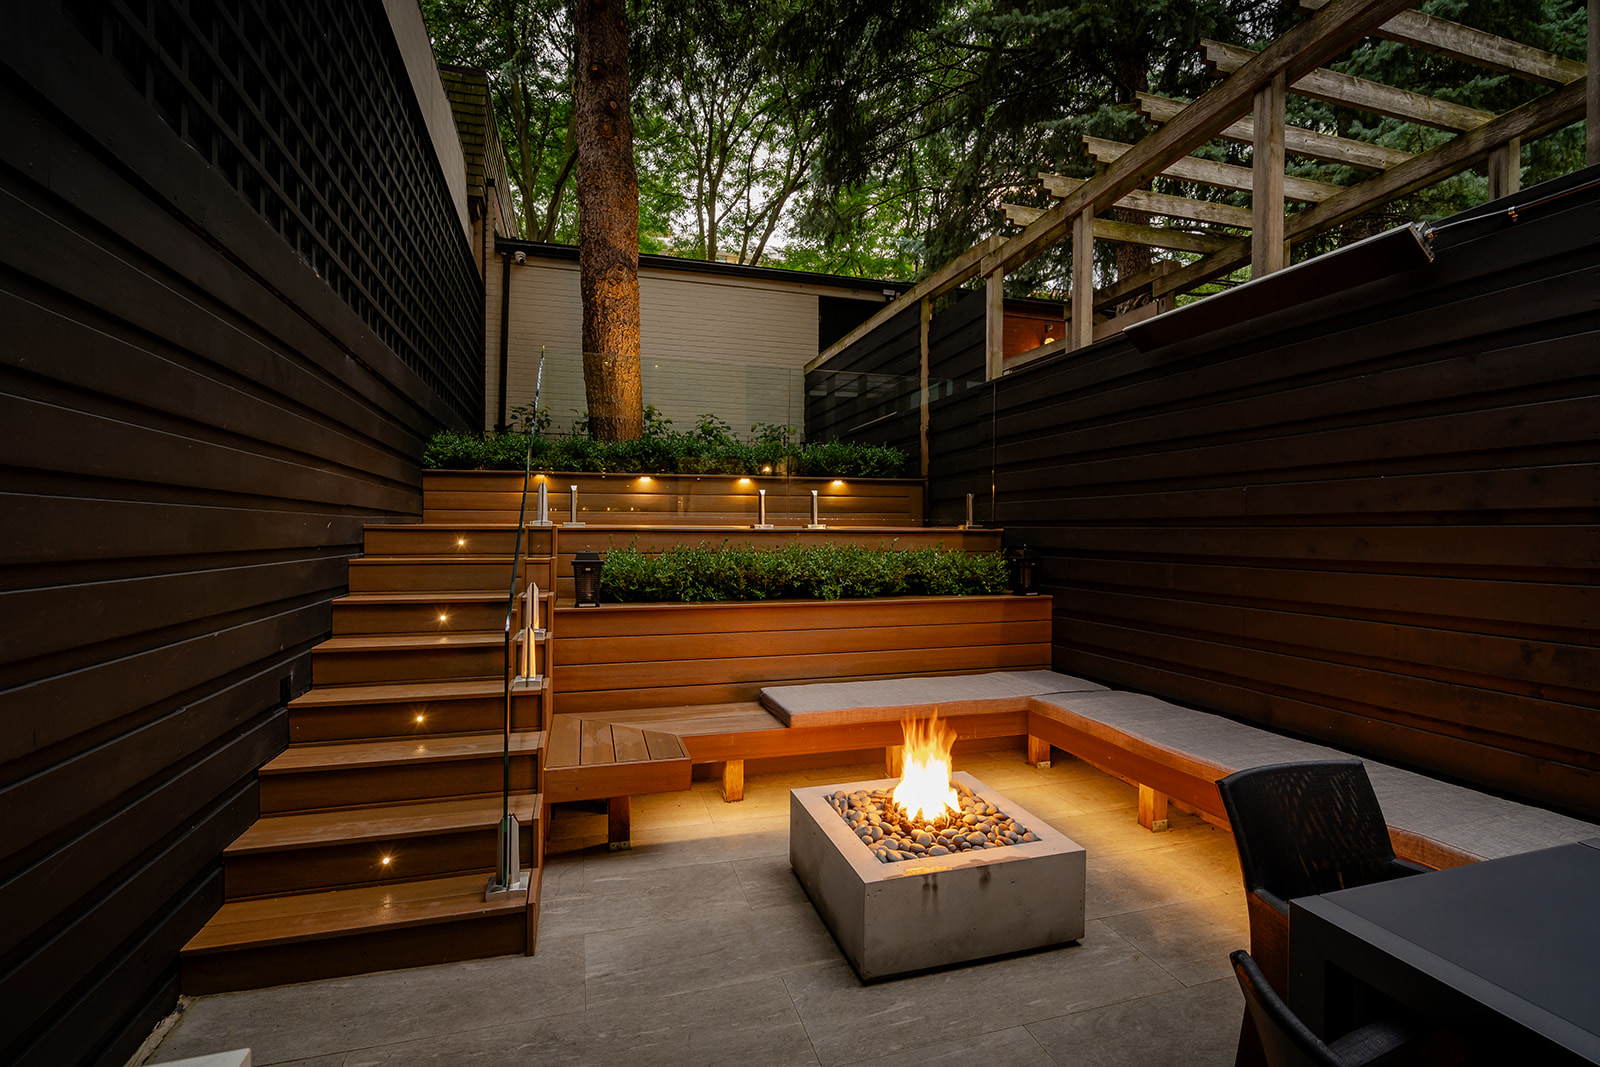 A seating area with a lit fireplace in the middle.